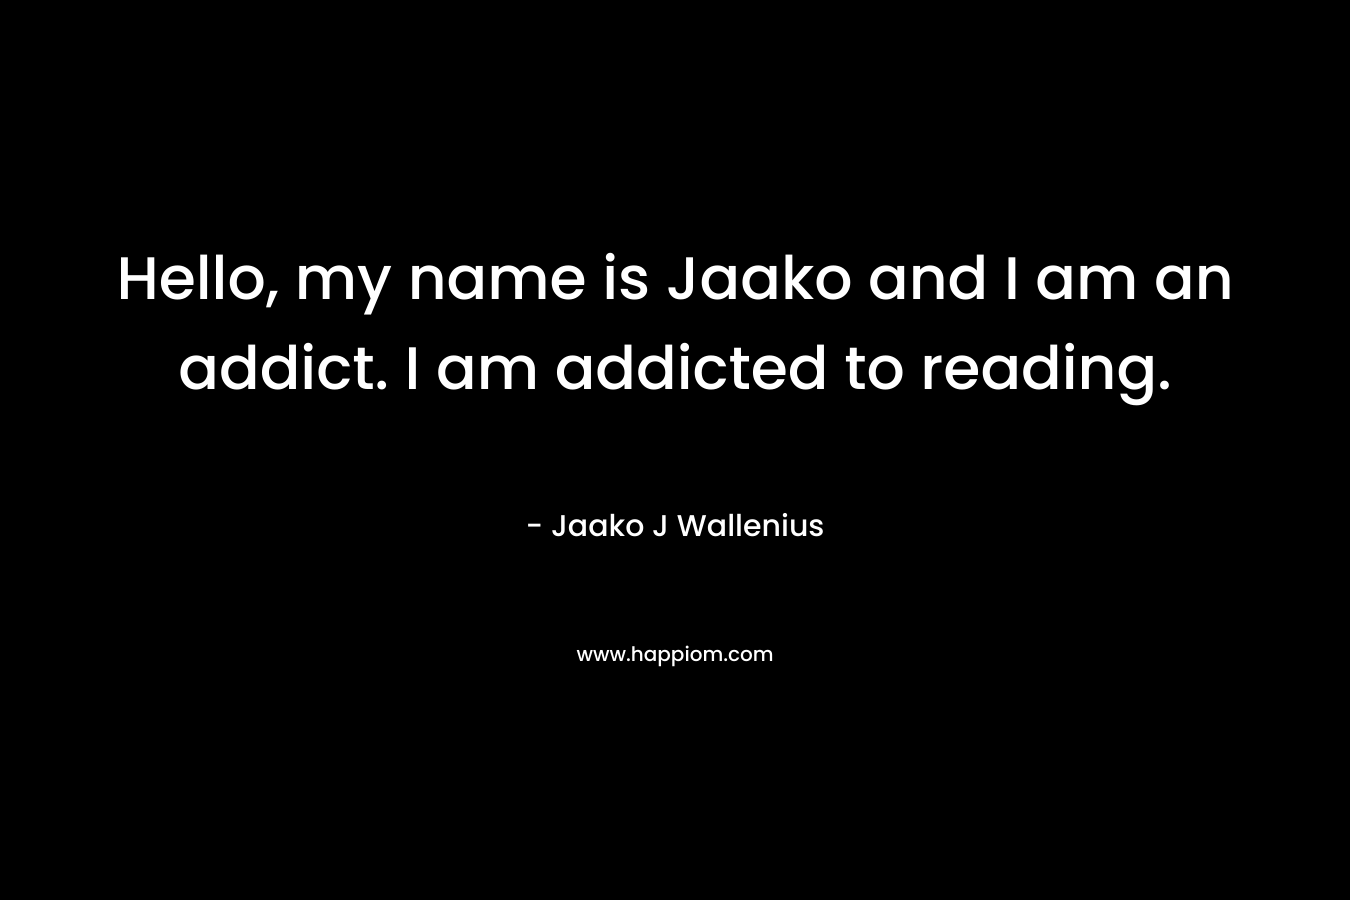 Hello, my name is Jaako and I am an addict. I am addicted to reading.